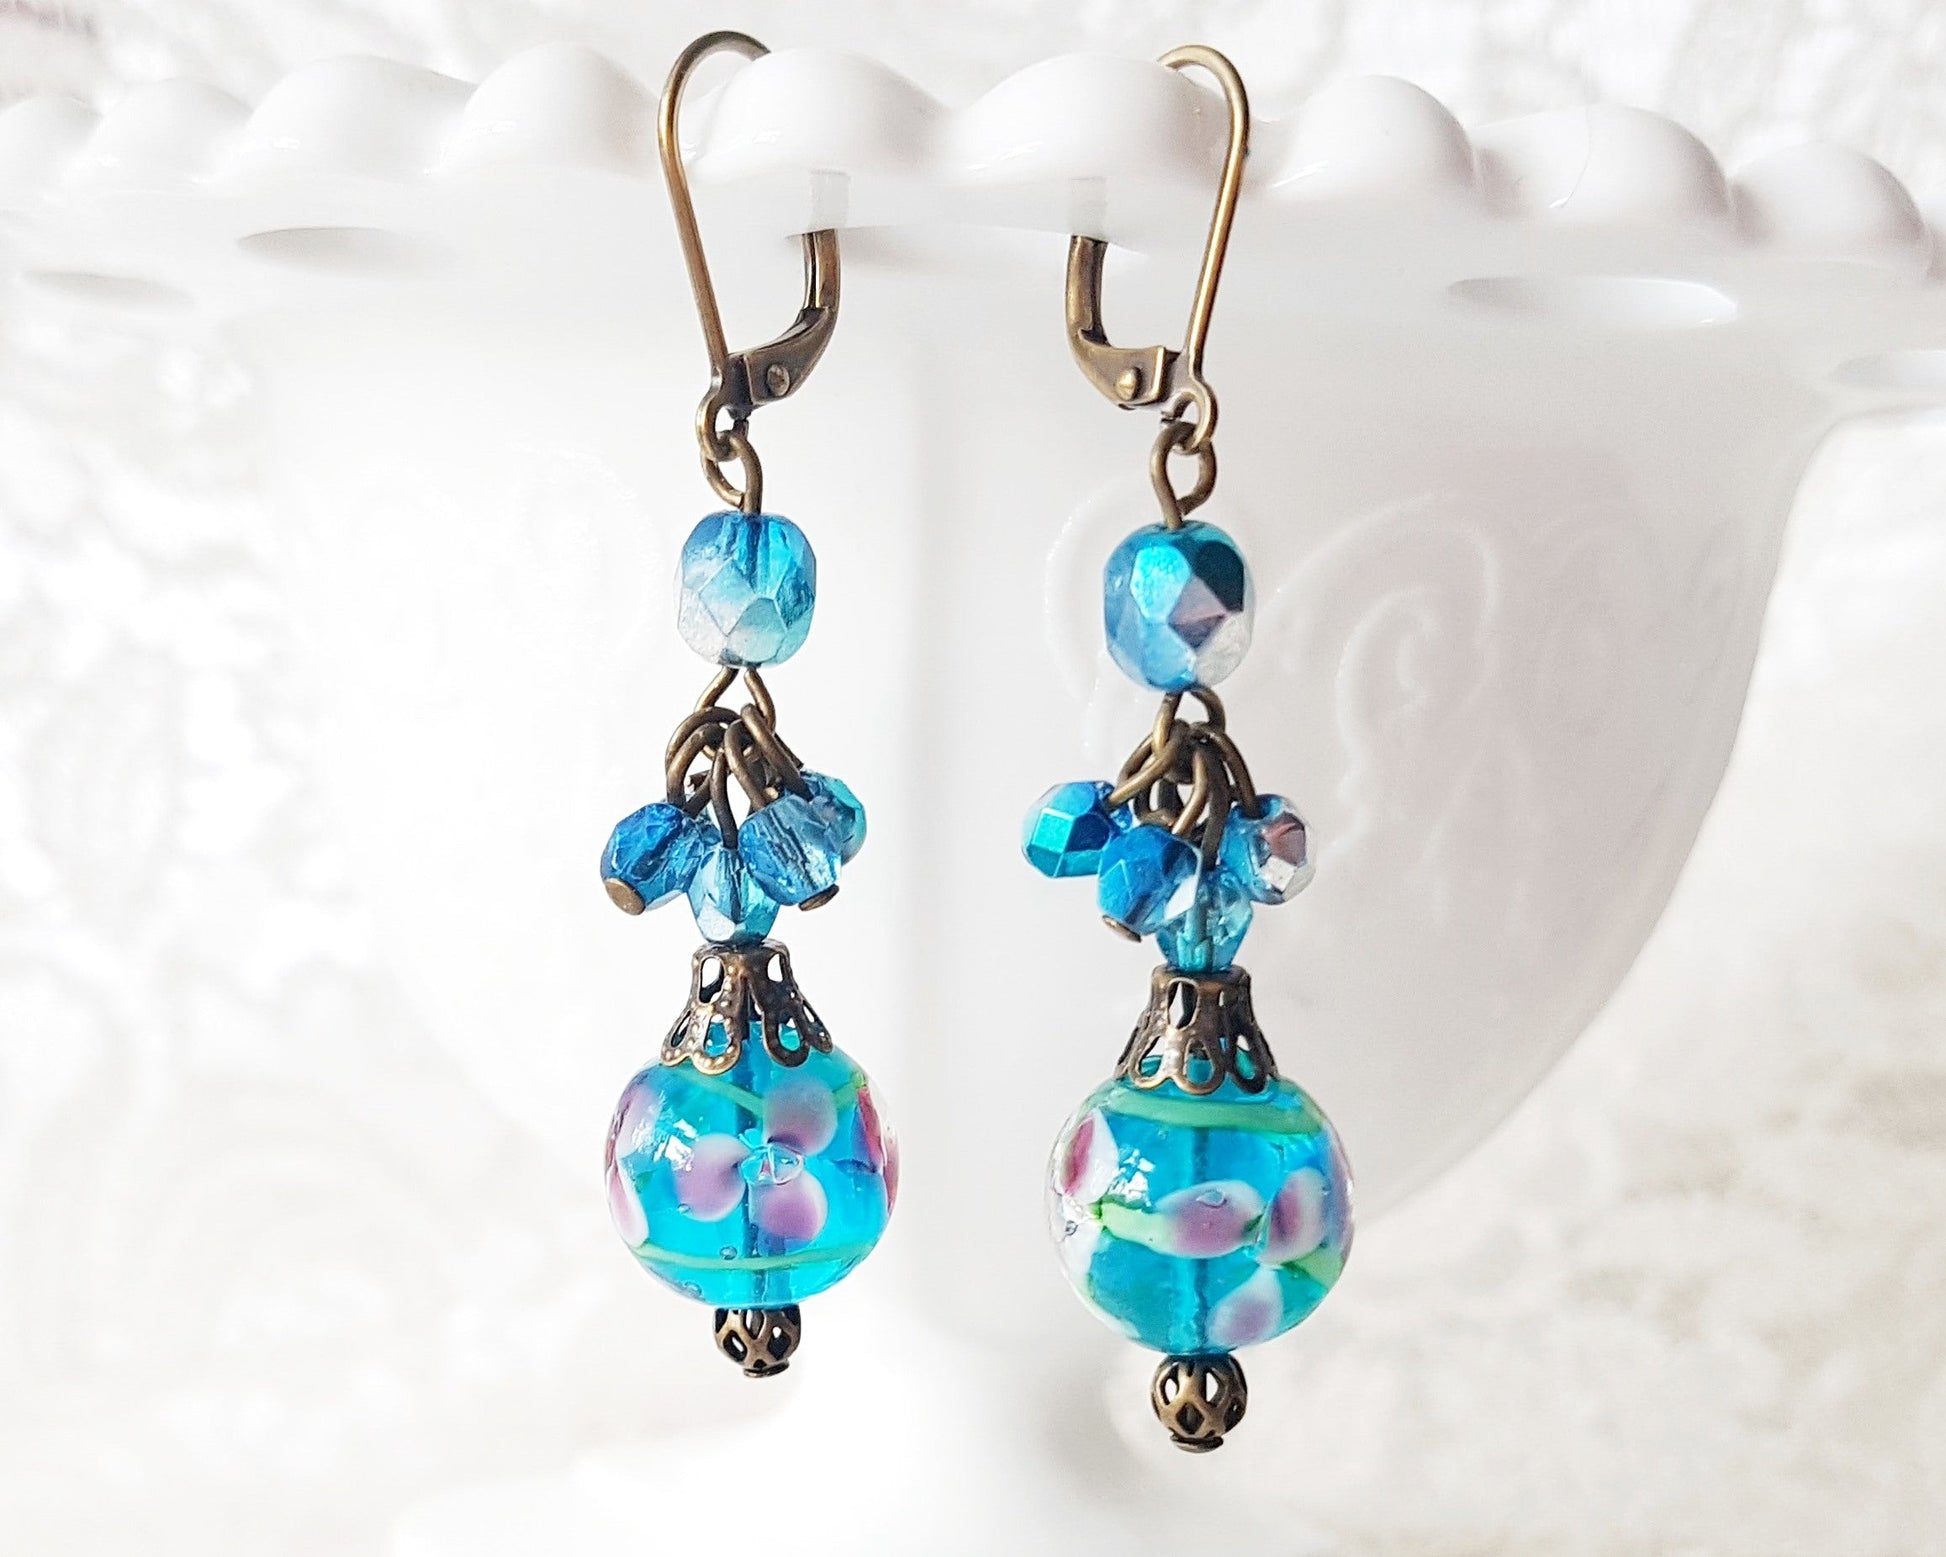 Long Blue Floral Vintage Inspired Earrings made with deep aqua blue beads, floral beads, and sparkly clusters above. The earring dangle on white vase on white lace